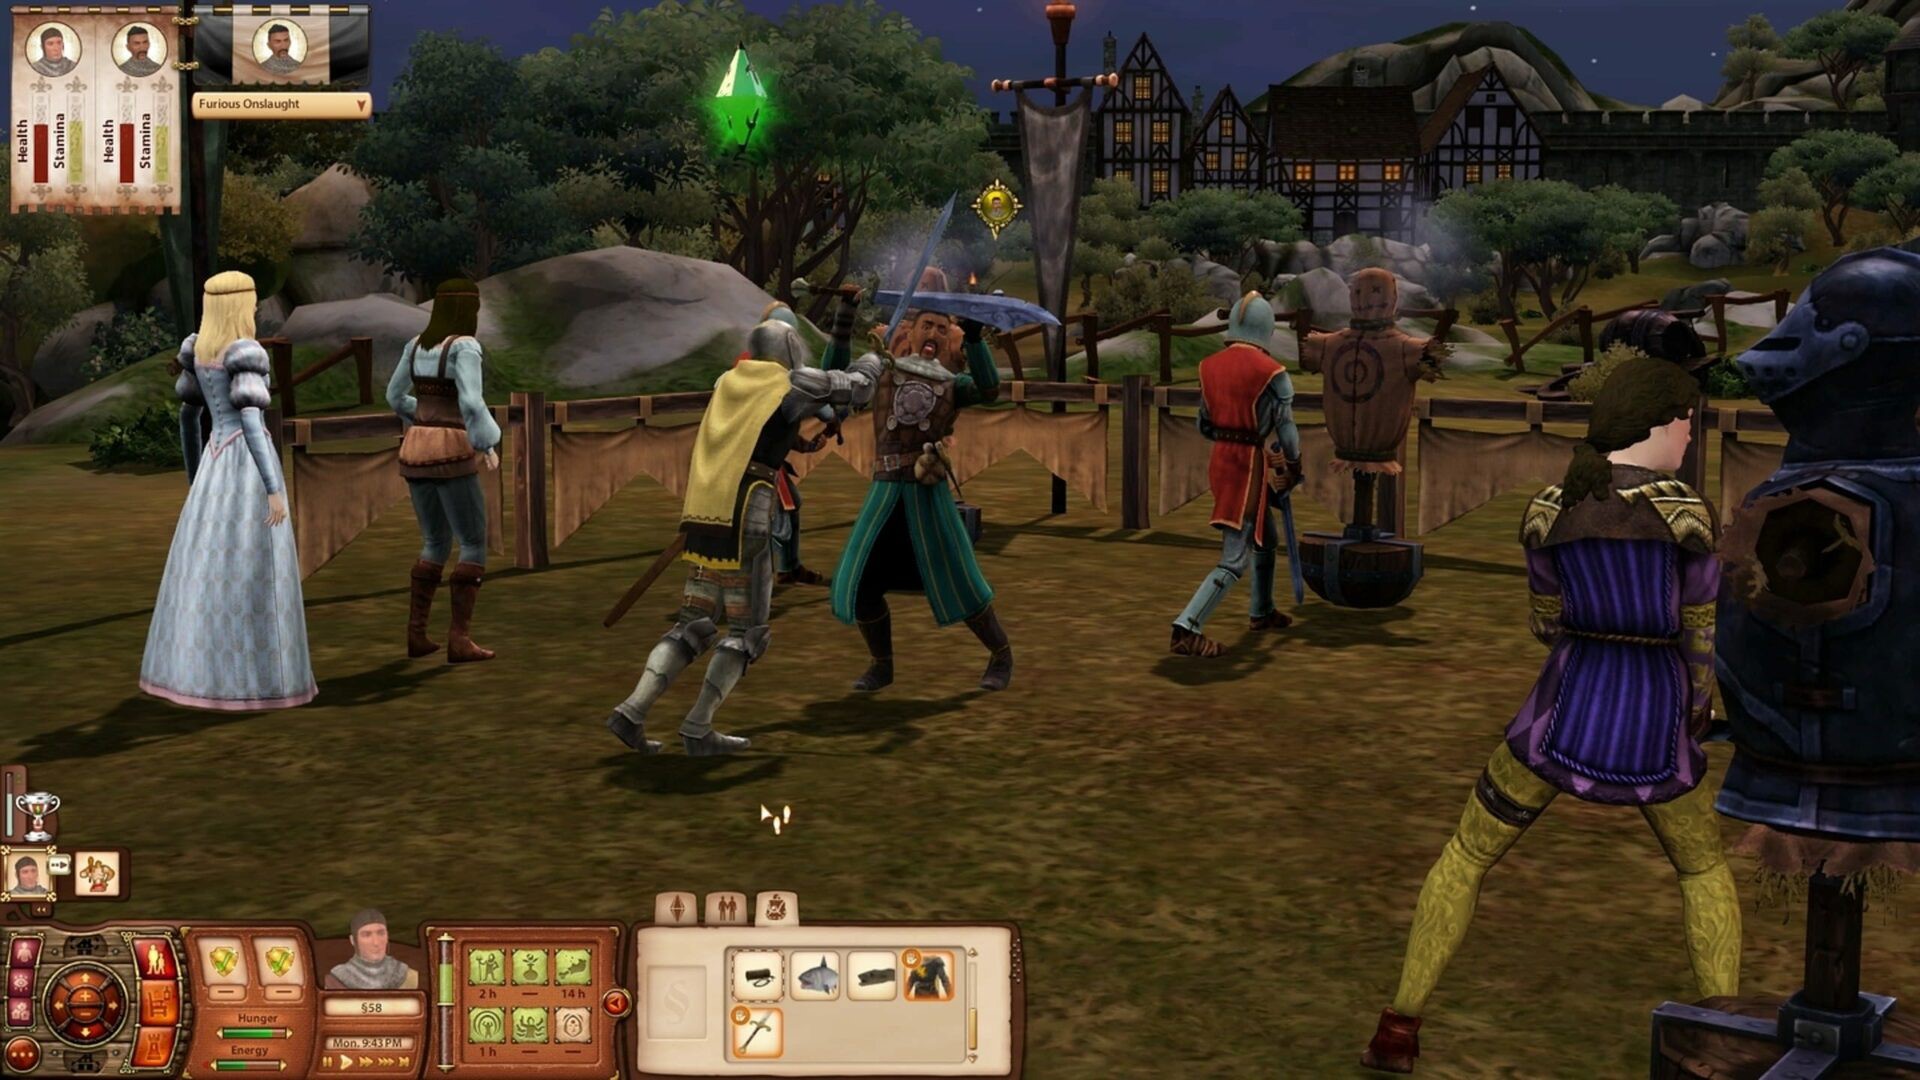 the sims medieval deluxe edition igg